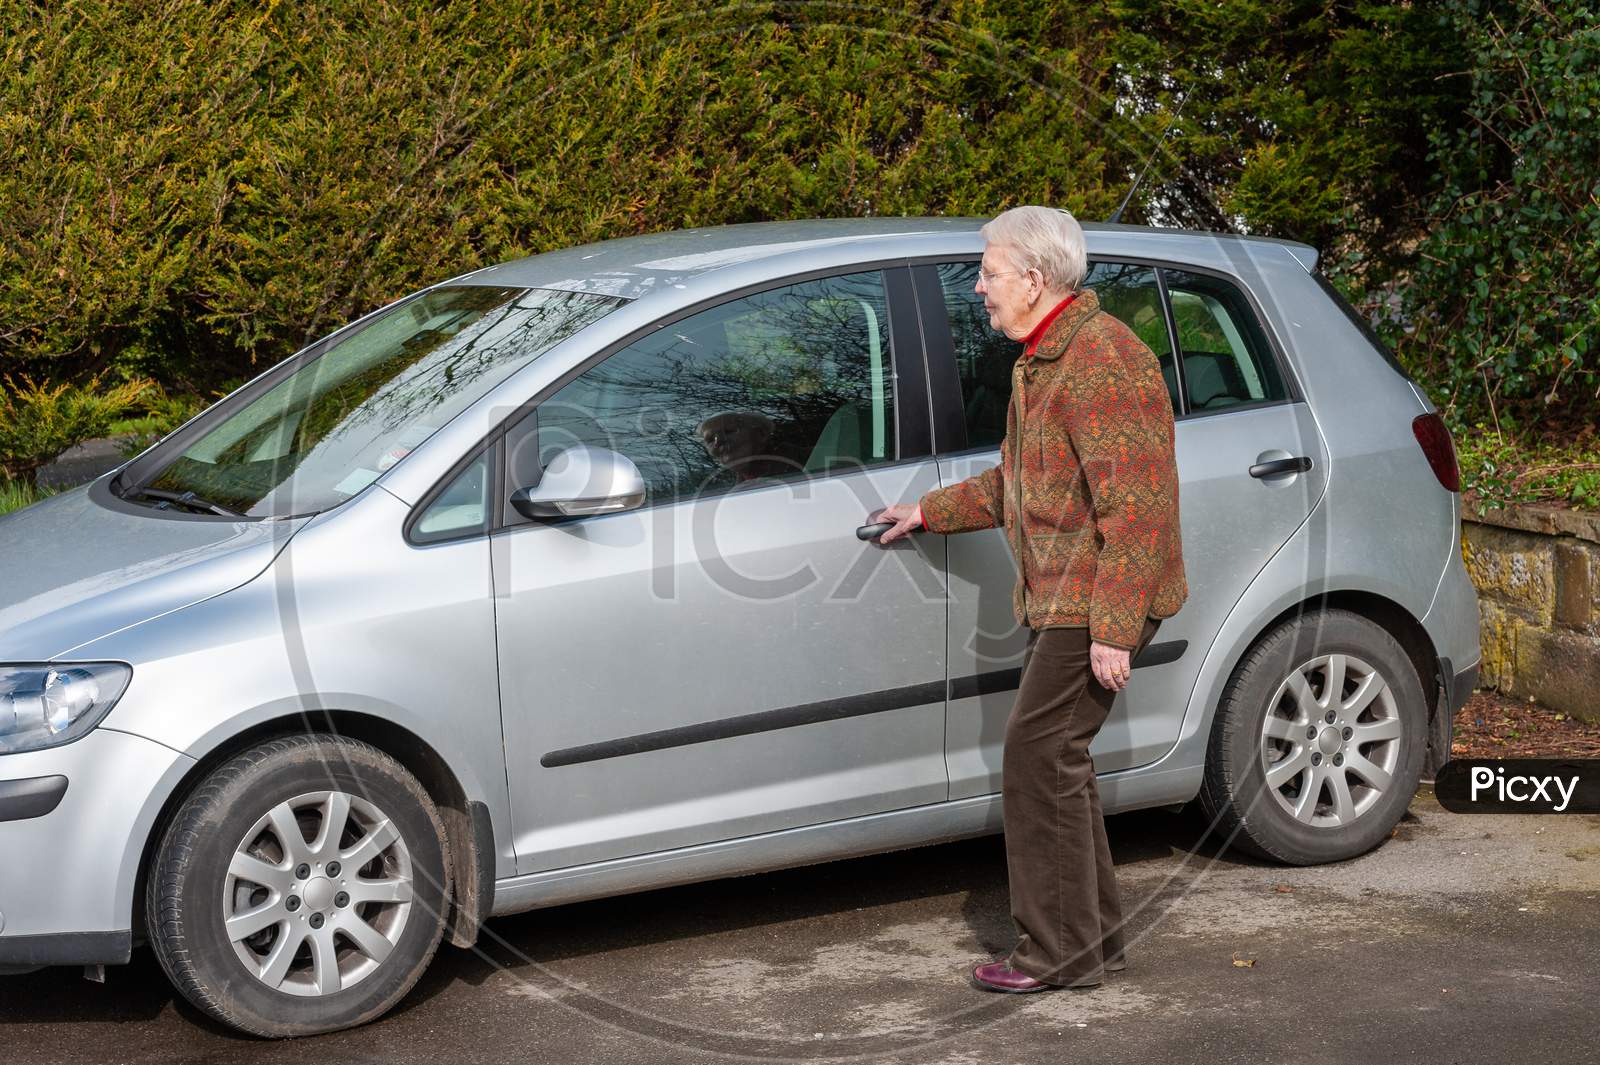 An Elderly Lady About To Open A Car Door